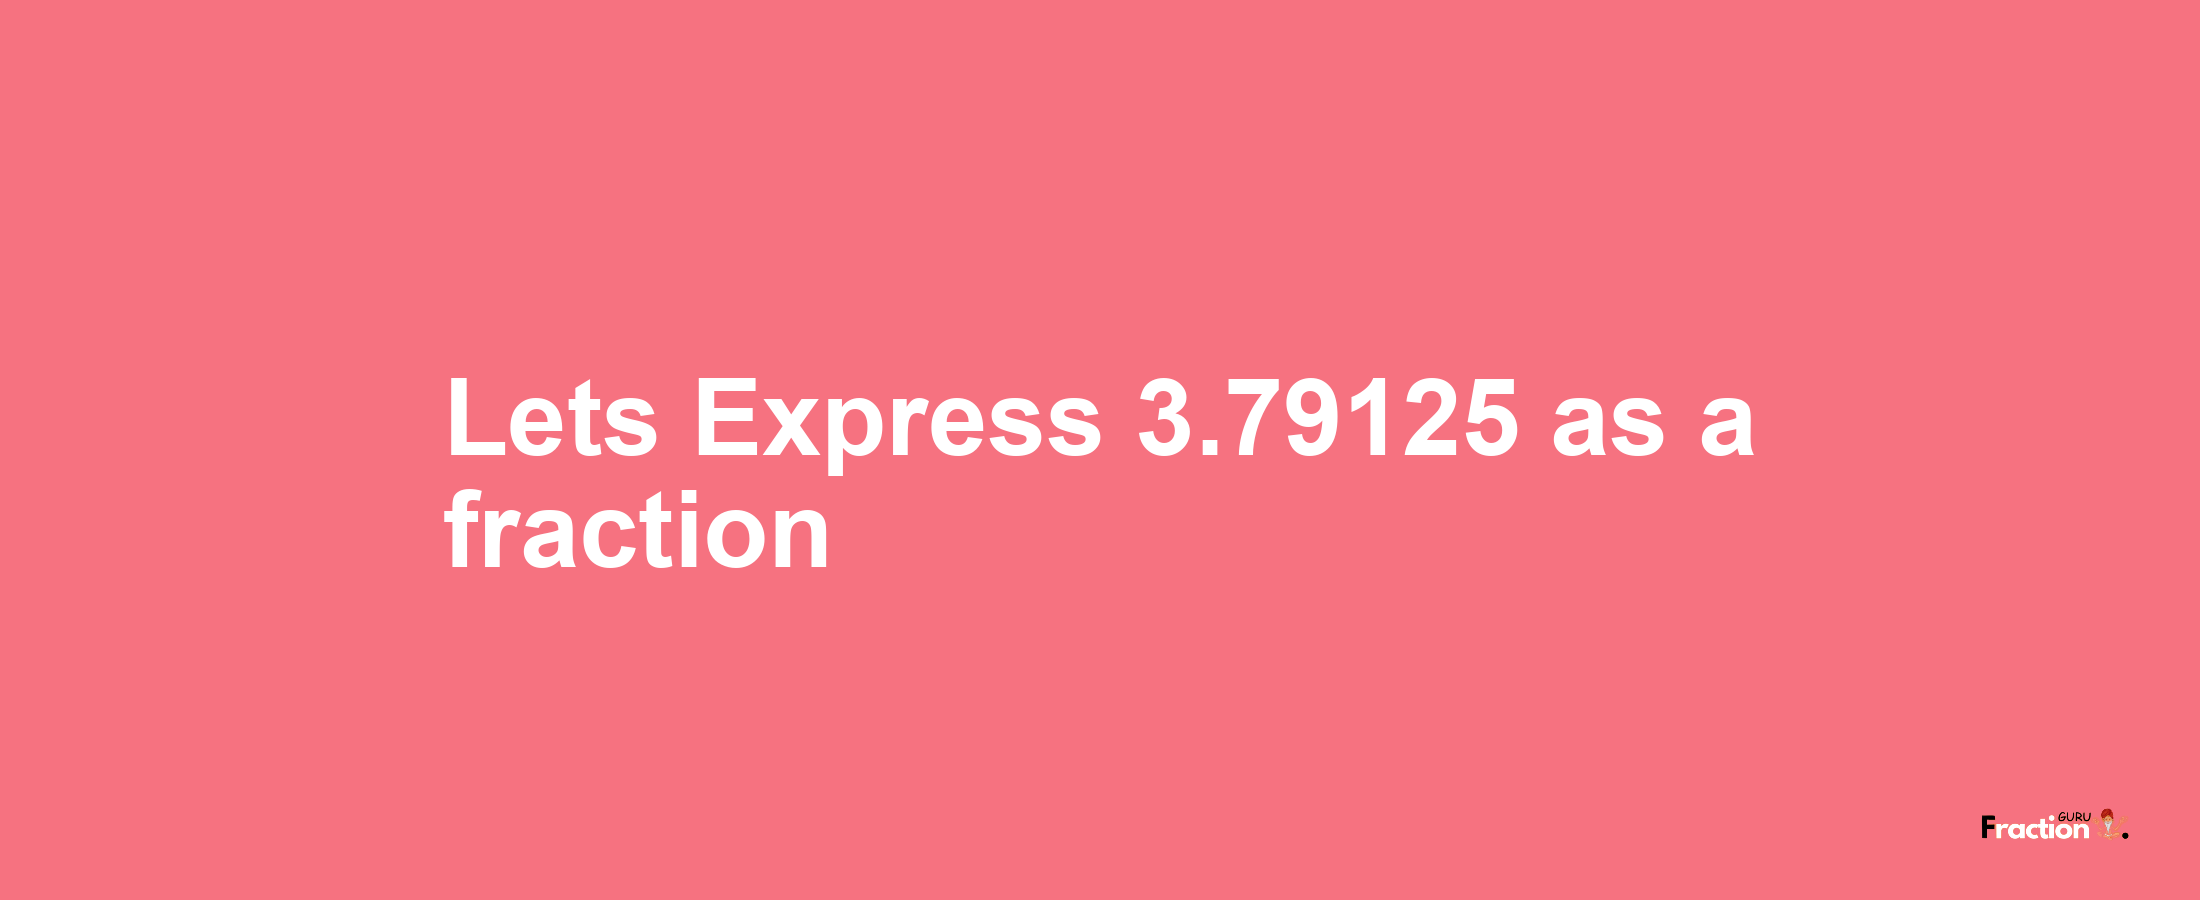 Lets Express 3.79125 as afraction